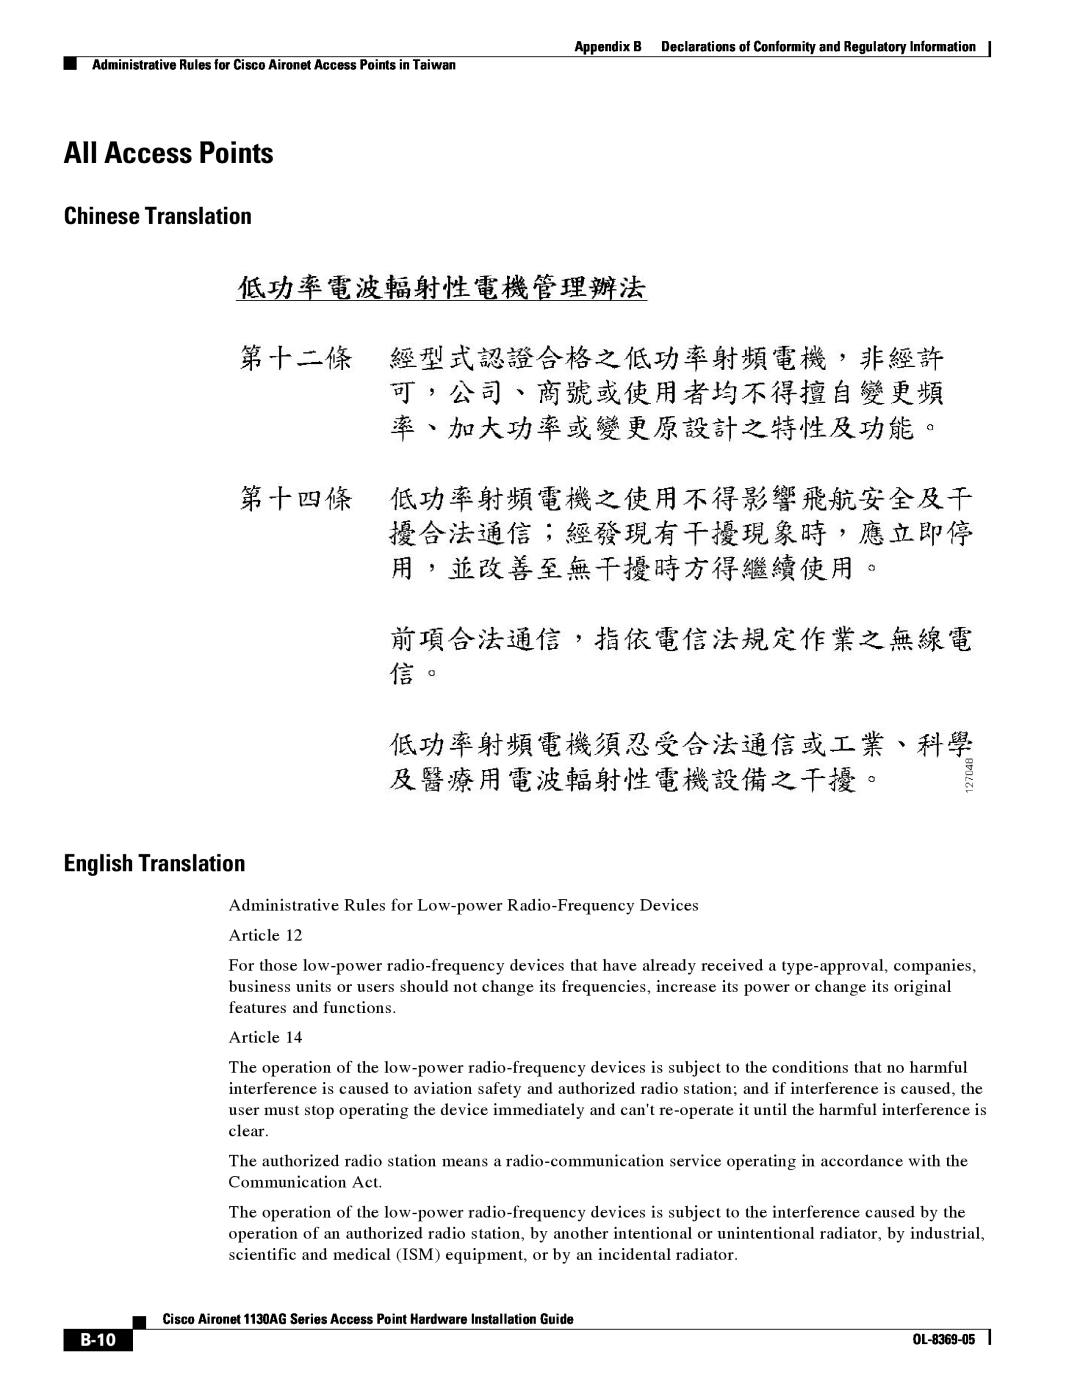 Cisco Systems 1130AG manual All Access Points, Chinese Translation English Translation, B-10 